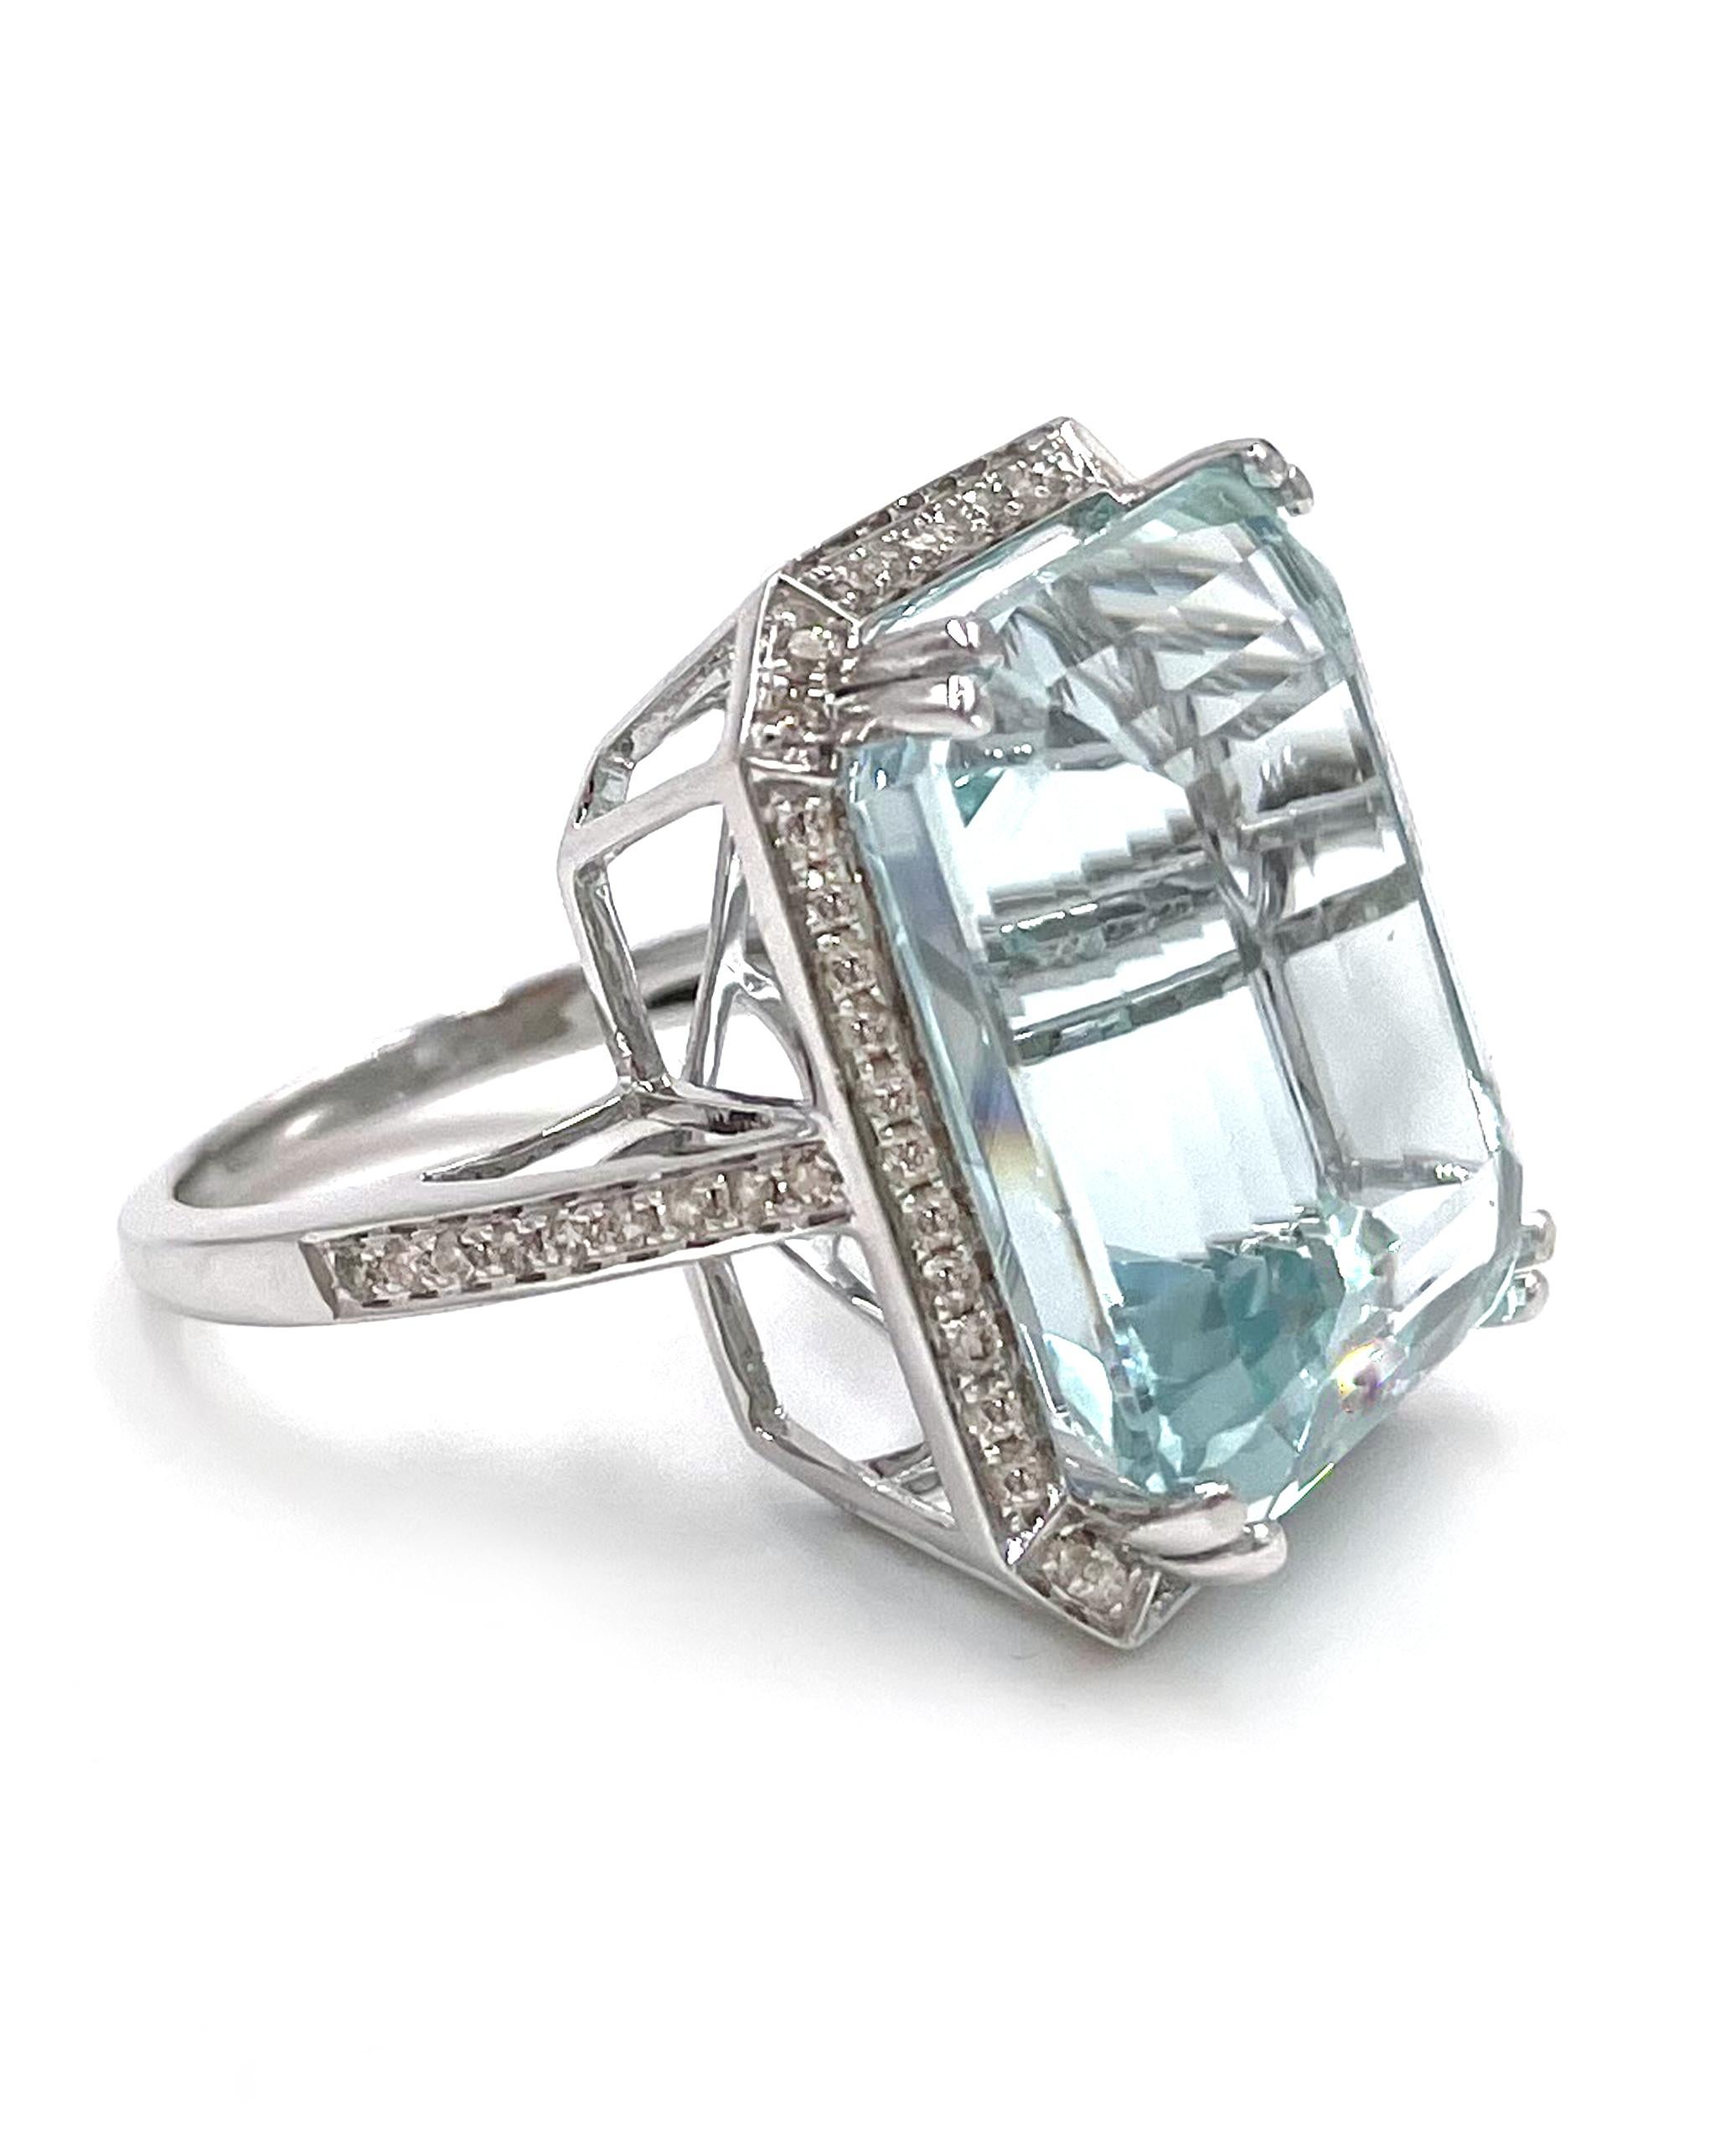 An everyday statement! This 14K white gold ring features a spectacular step cut aquamarine weighing 23.93 carats.  The ring is furnished with an additional 62 round diamonds weighing a total of 0.52 carat (H/I color, SI clarity).

